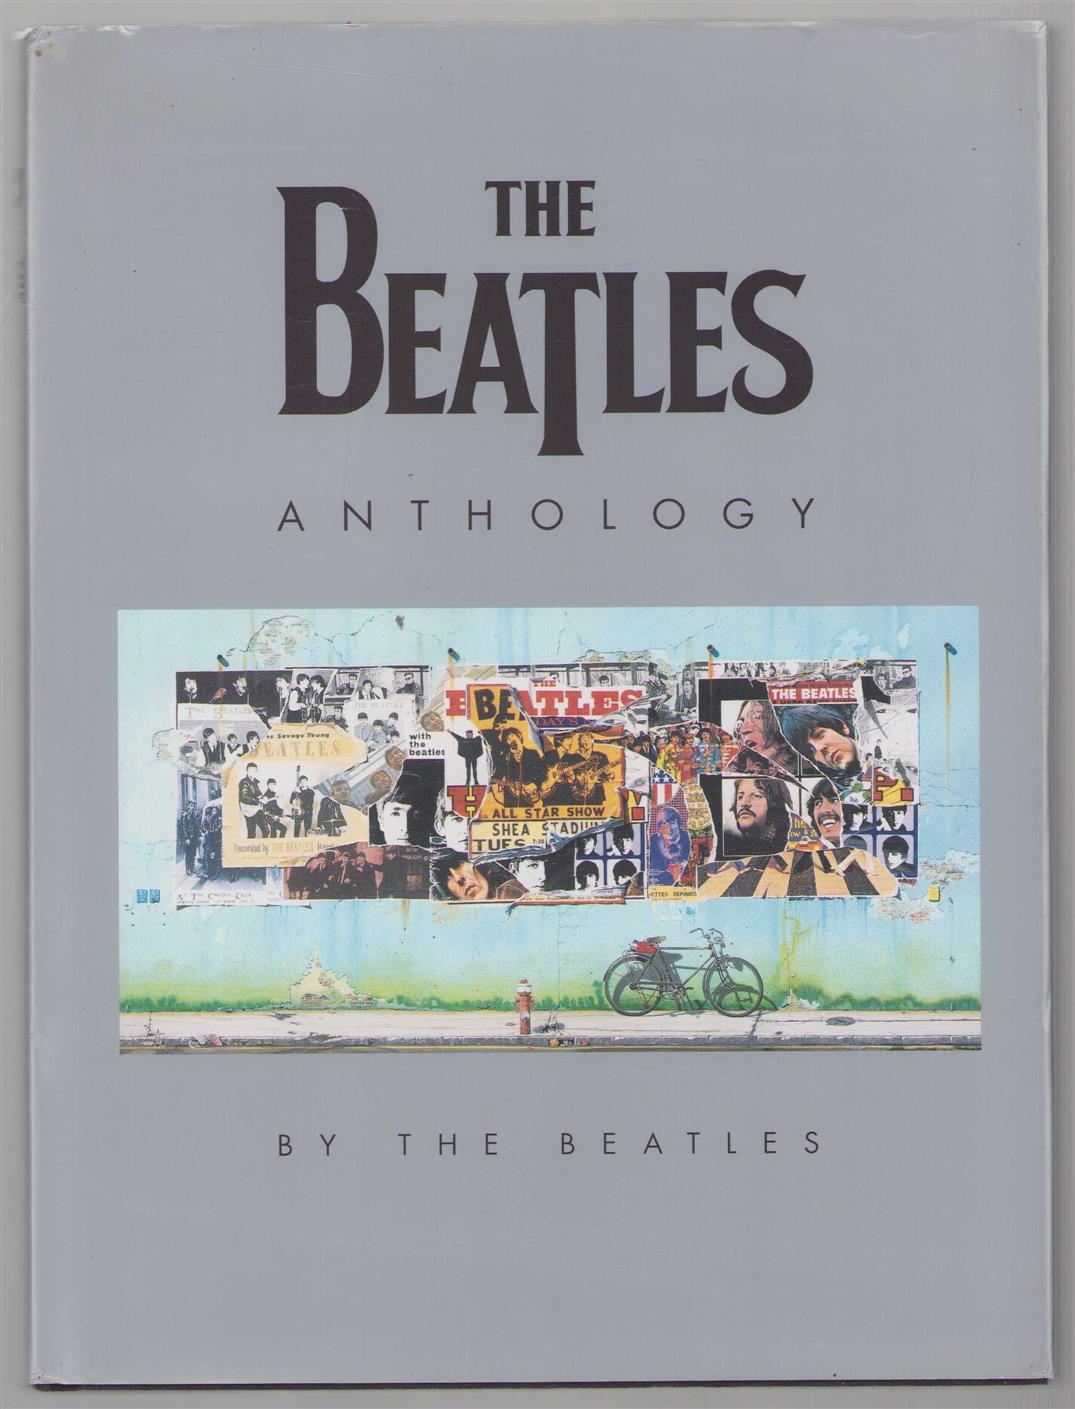 The Beatles - The Beatles anthology.